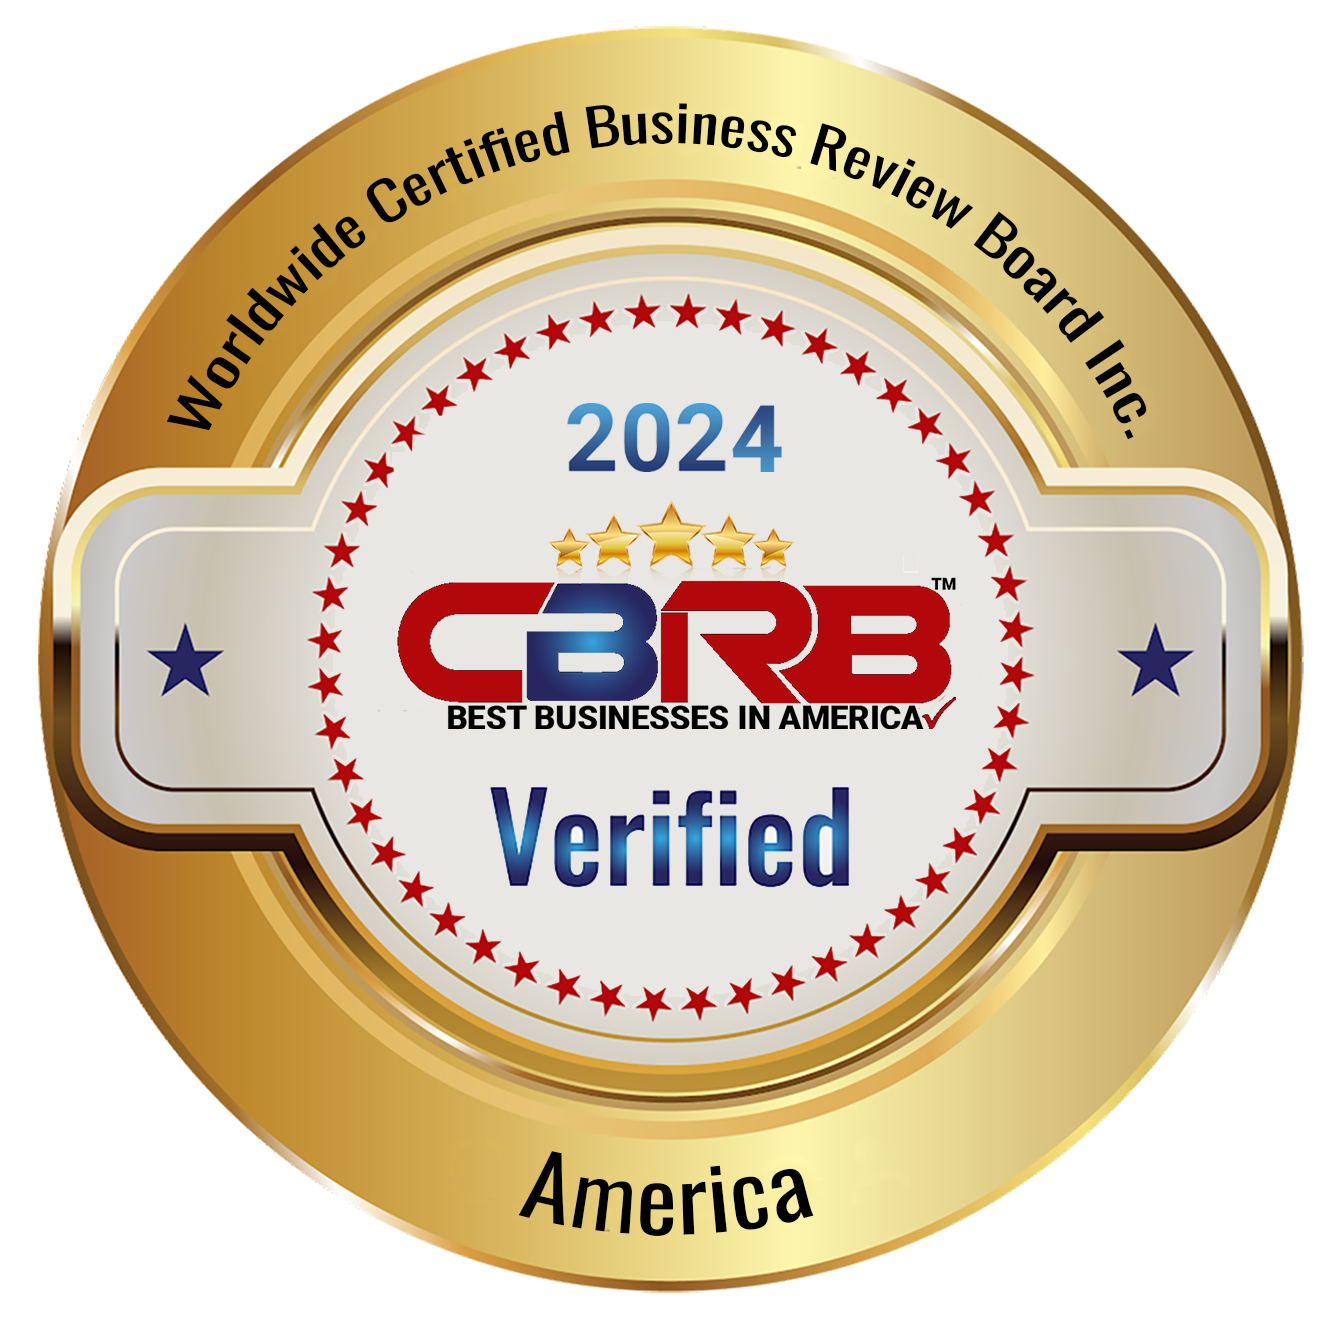 Autoloss has been selected by WCBRB as one of The Best Businesses in America